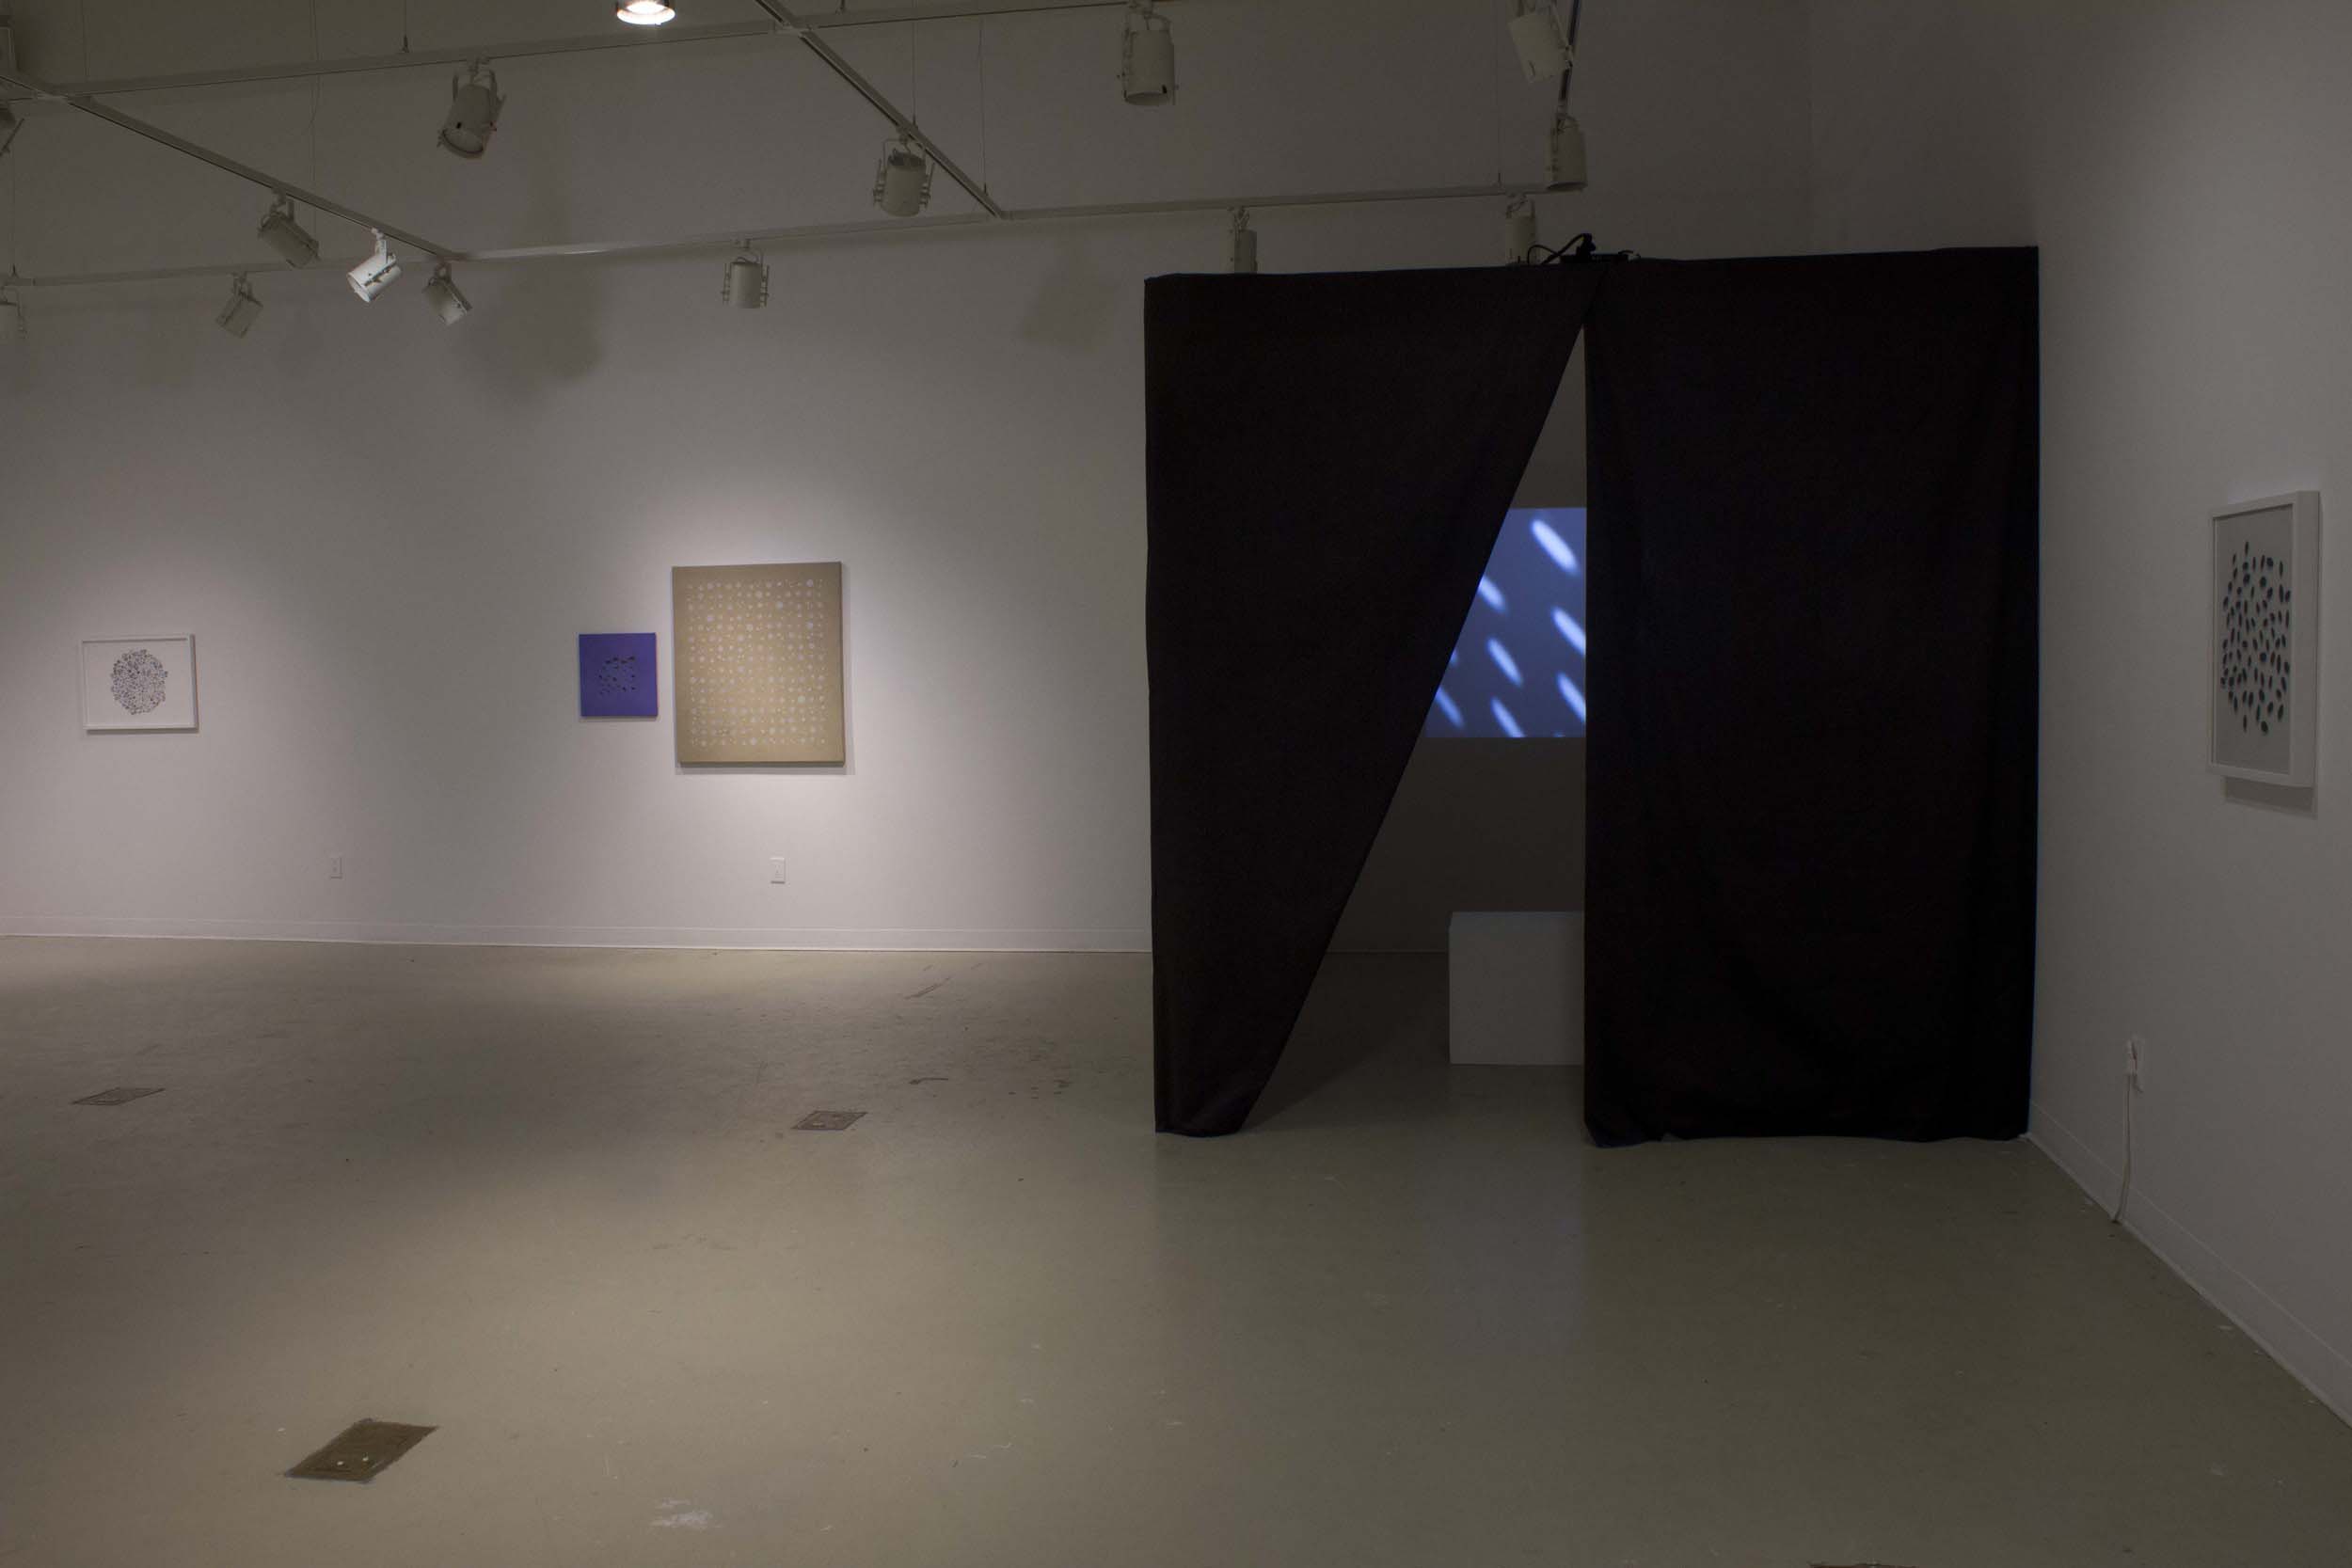   Slow Seeing  MFA Thesis Exhibition  Installation view at Gales Gallery  2016 